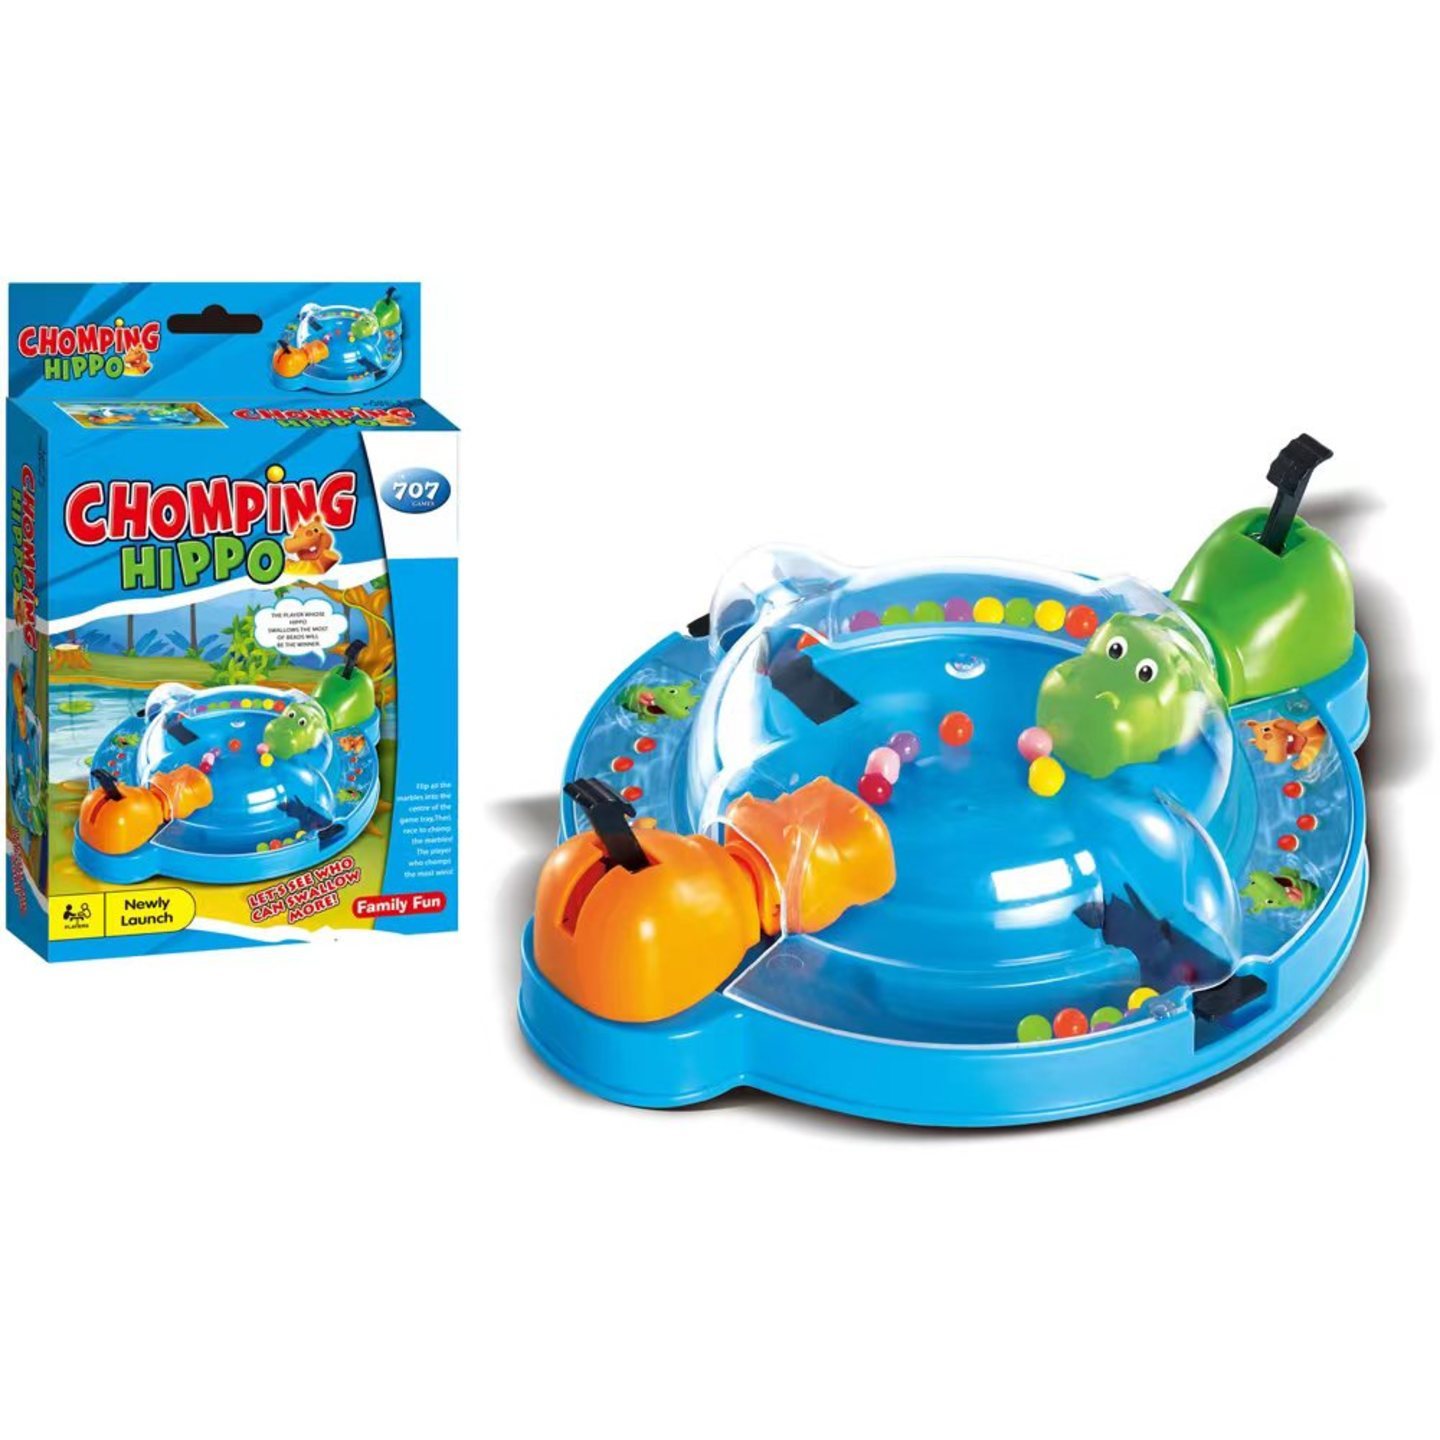 Board Food Grabbing Hungry Hippo Game Party Gift